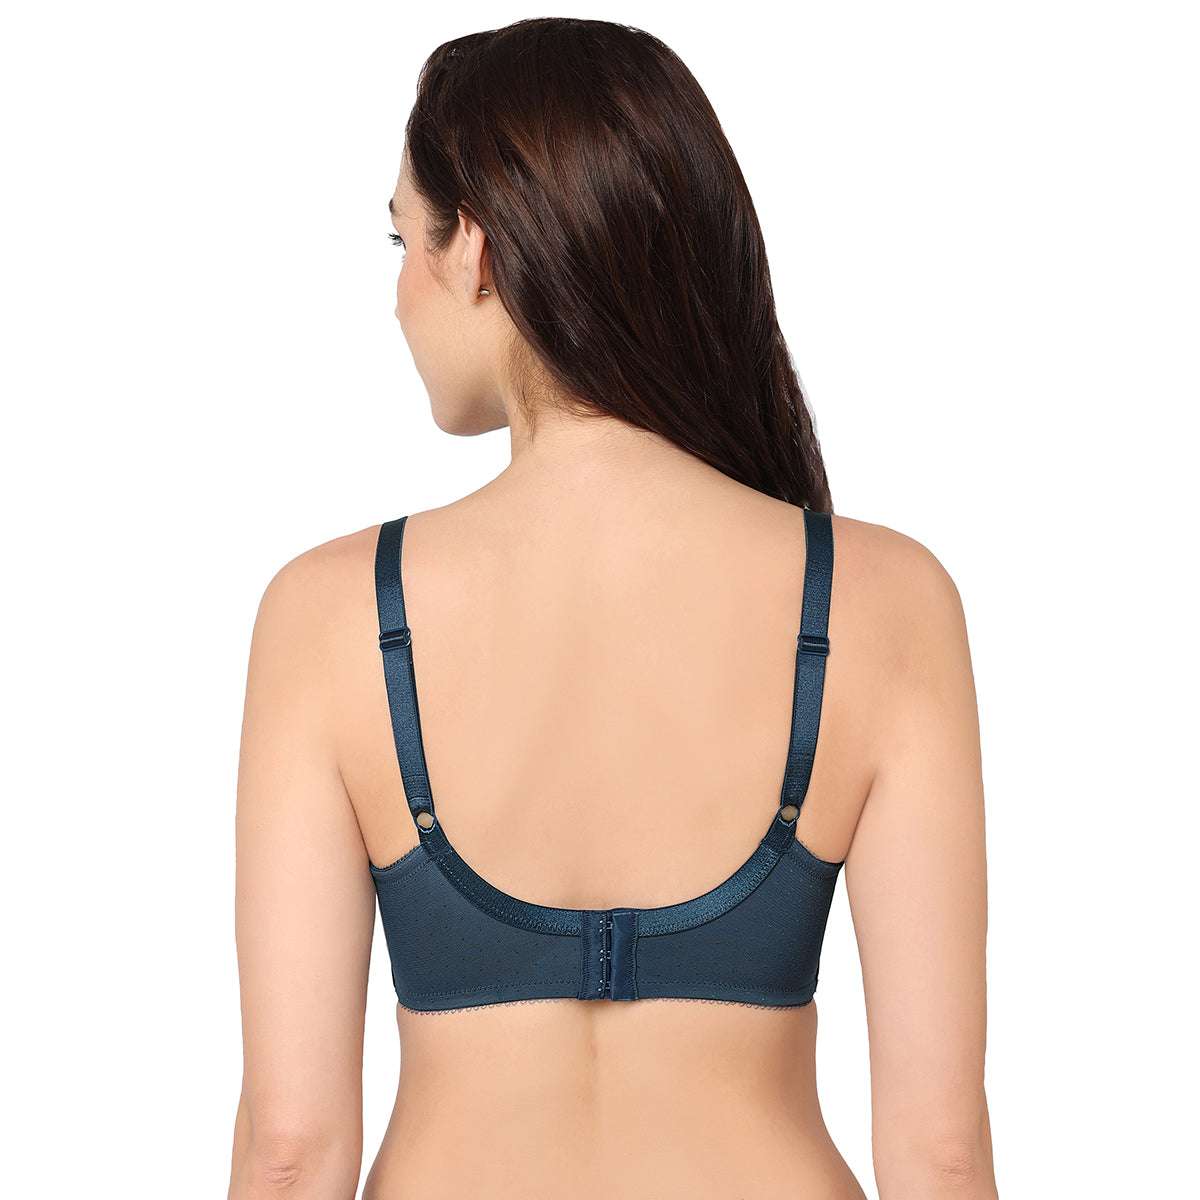 Buy Retro Chic Non-Padded Wired Full Coverage Full Cup Bra - Blue Online